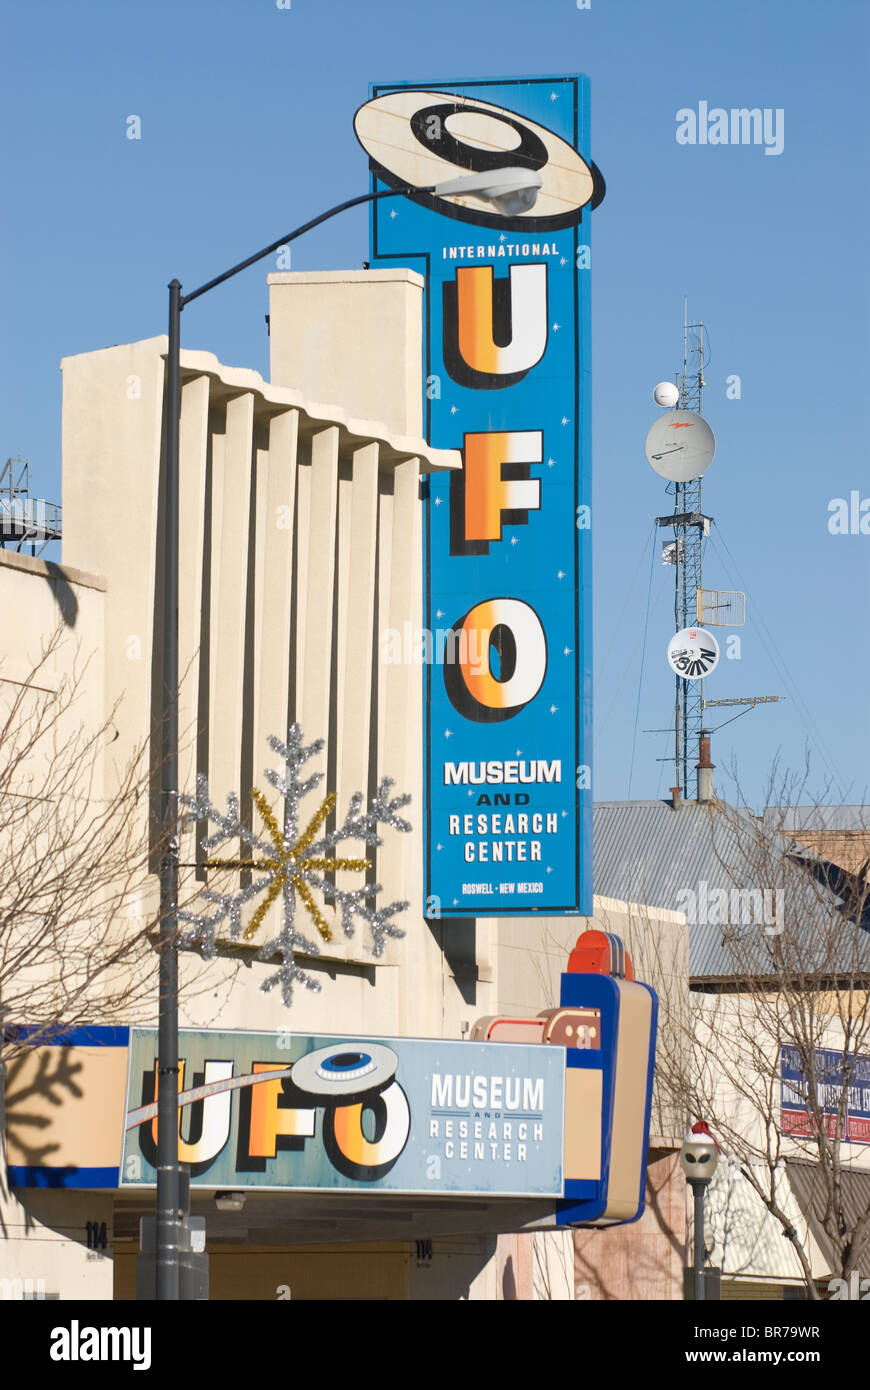 Das International UFO Museum and Research Center in Roswell, New Mexico. Stockfoto